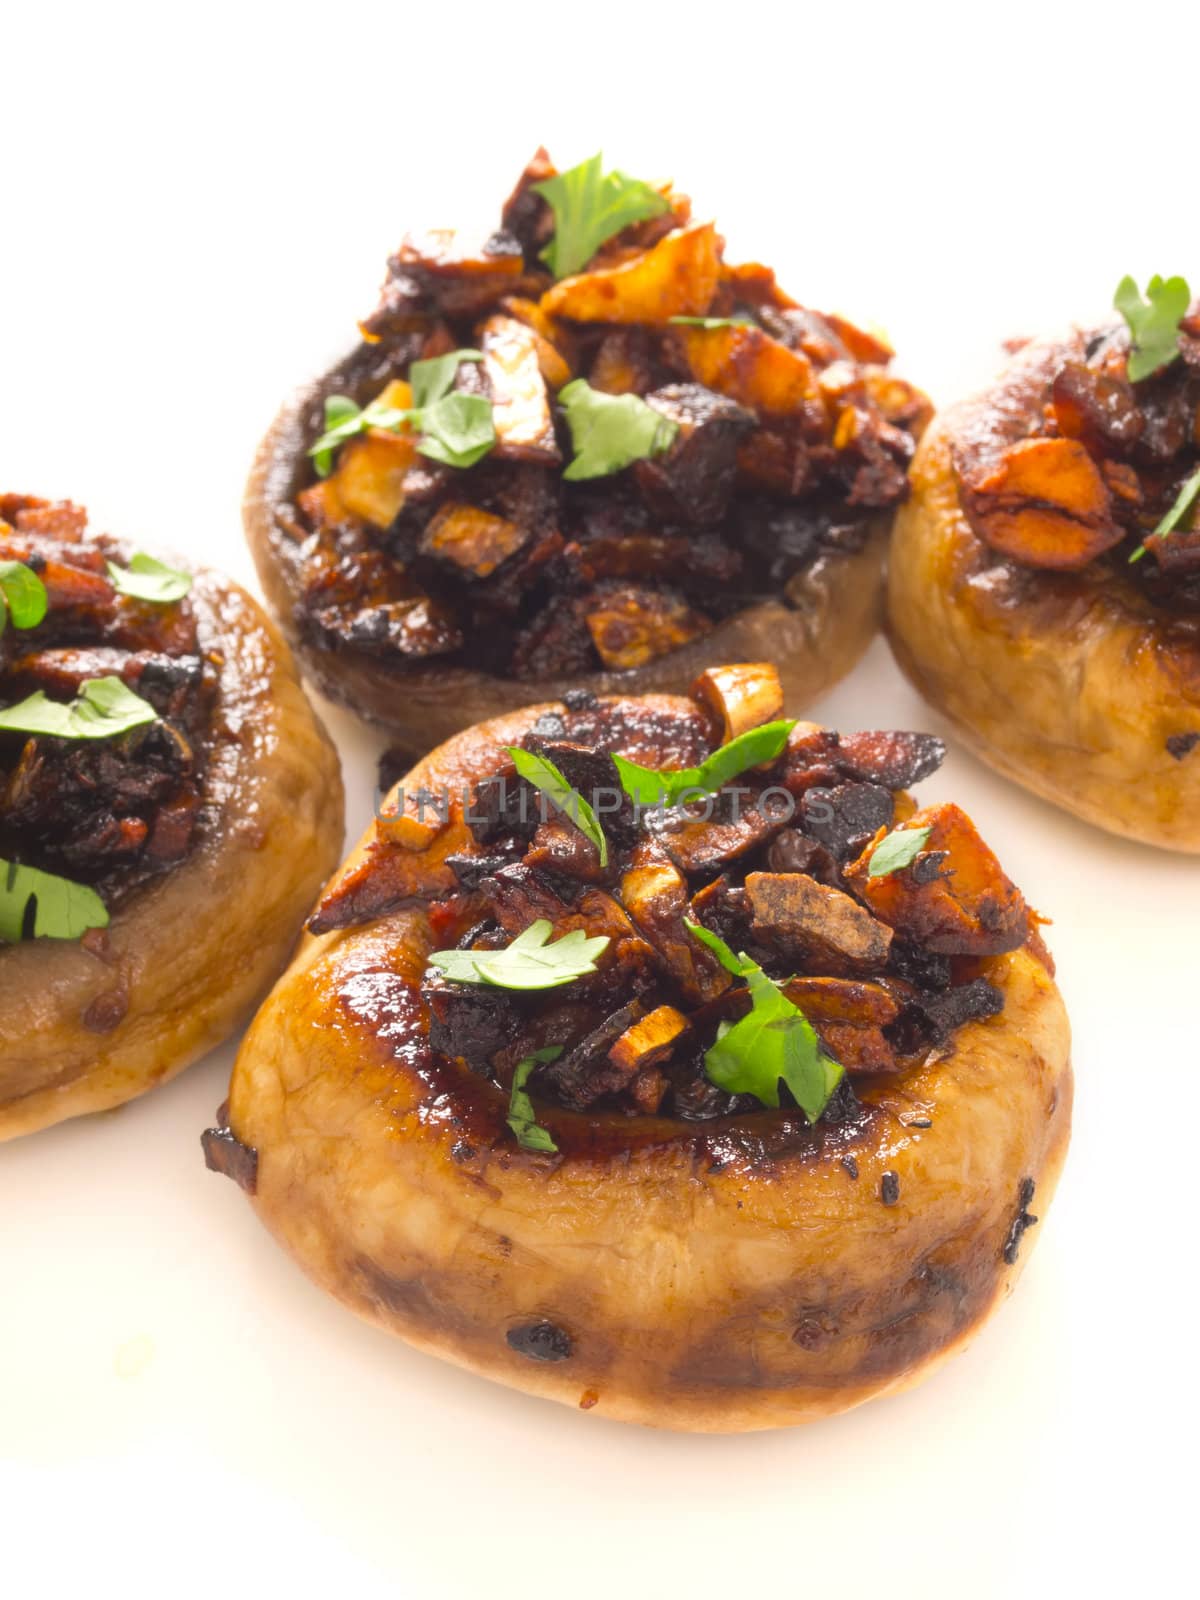 sauteed button mushrooms by zkruger